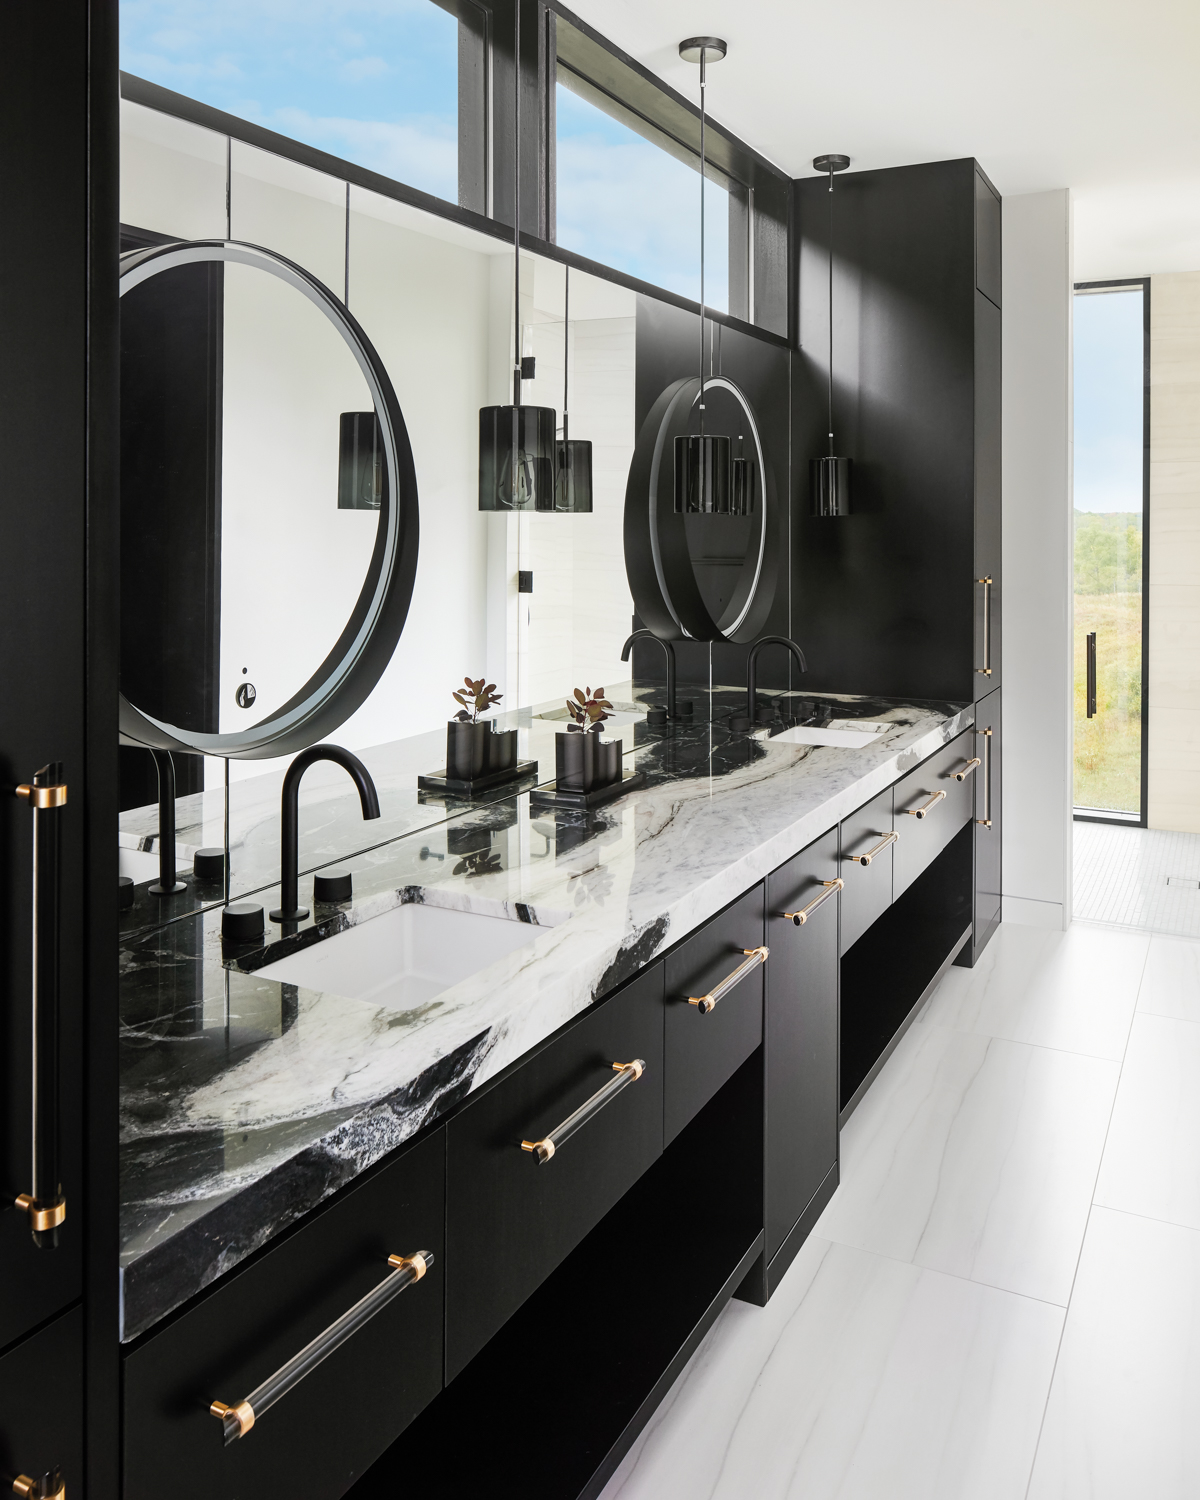 A bathroom with black cabinetry...